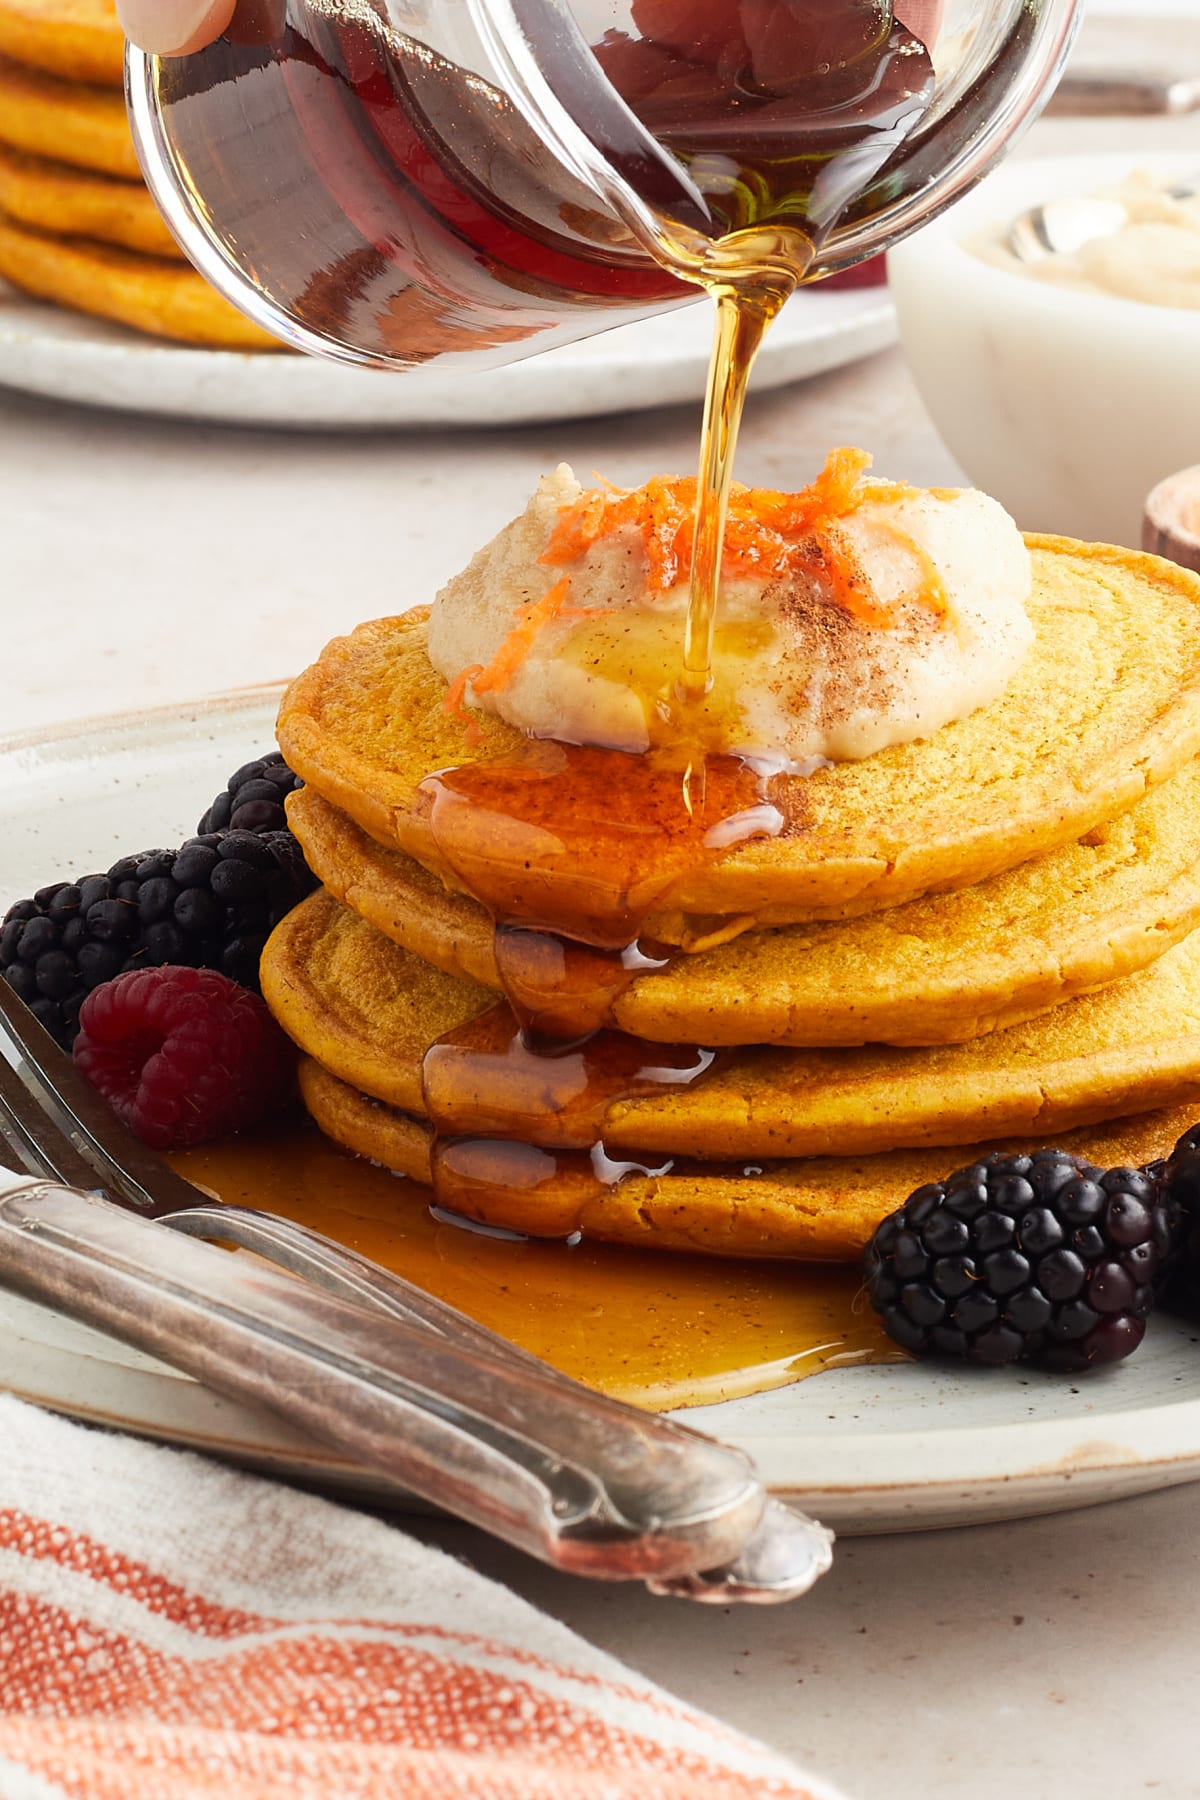 Maple syrup is being poured over a stack of four bright orange carrot pancakes topped with a maple cashew cream and grated carrot. Berries and a fork and knife sit on the plate with the pancakes.